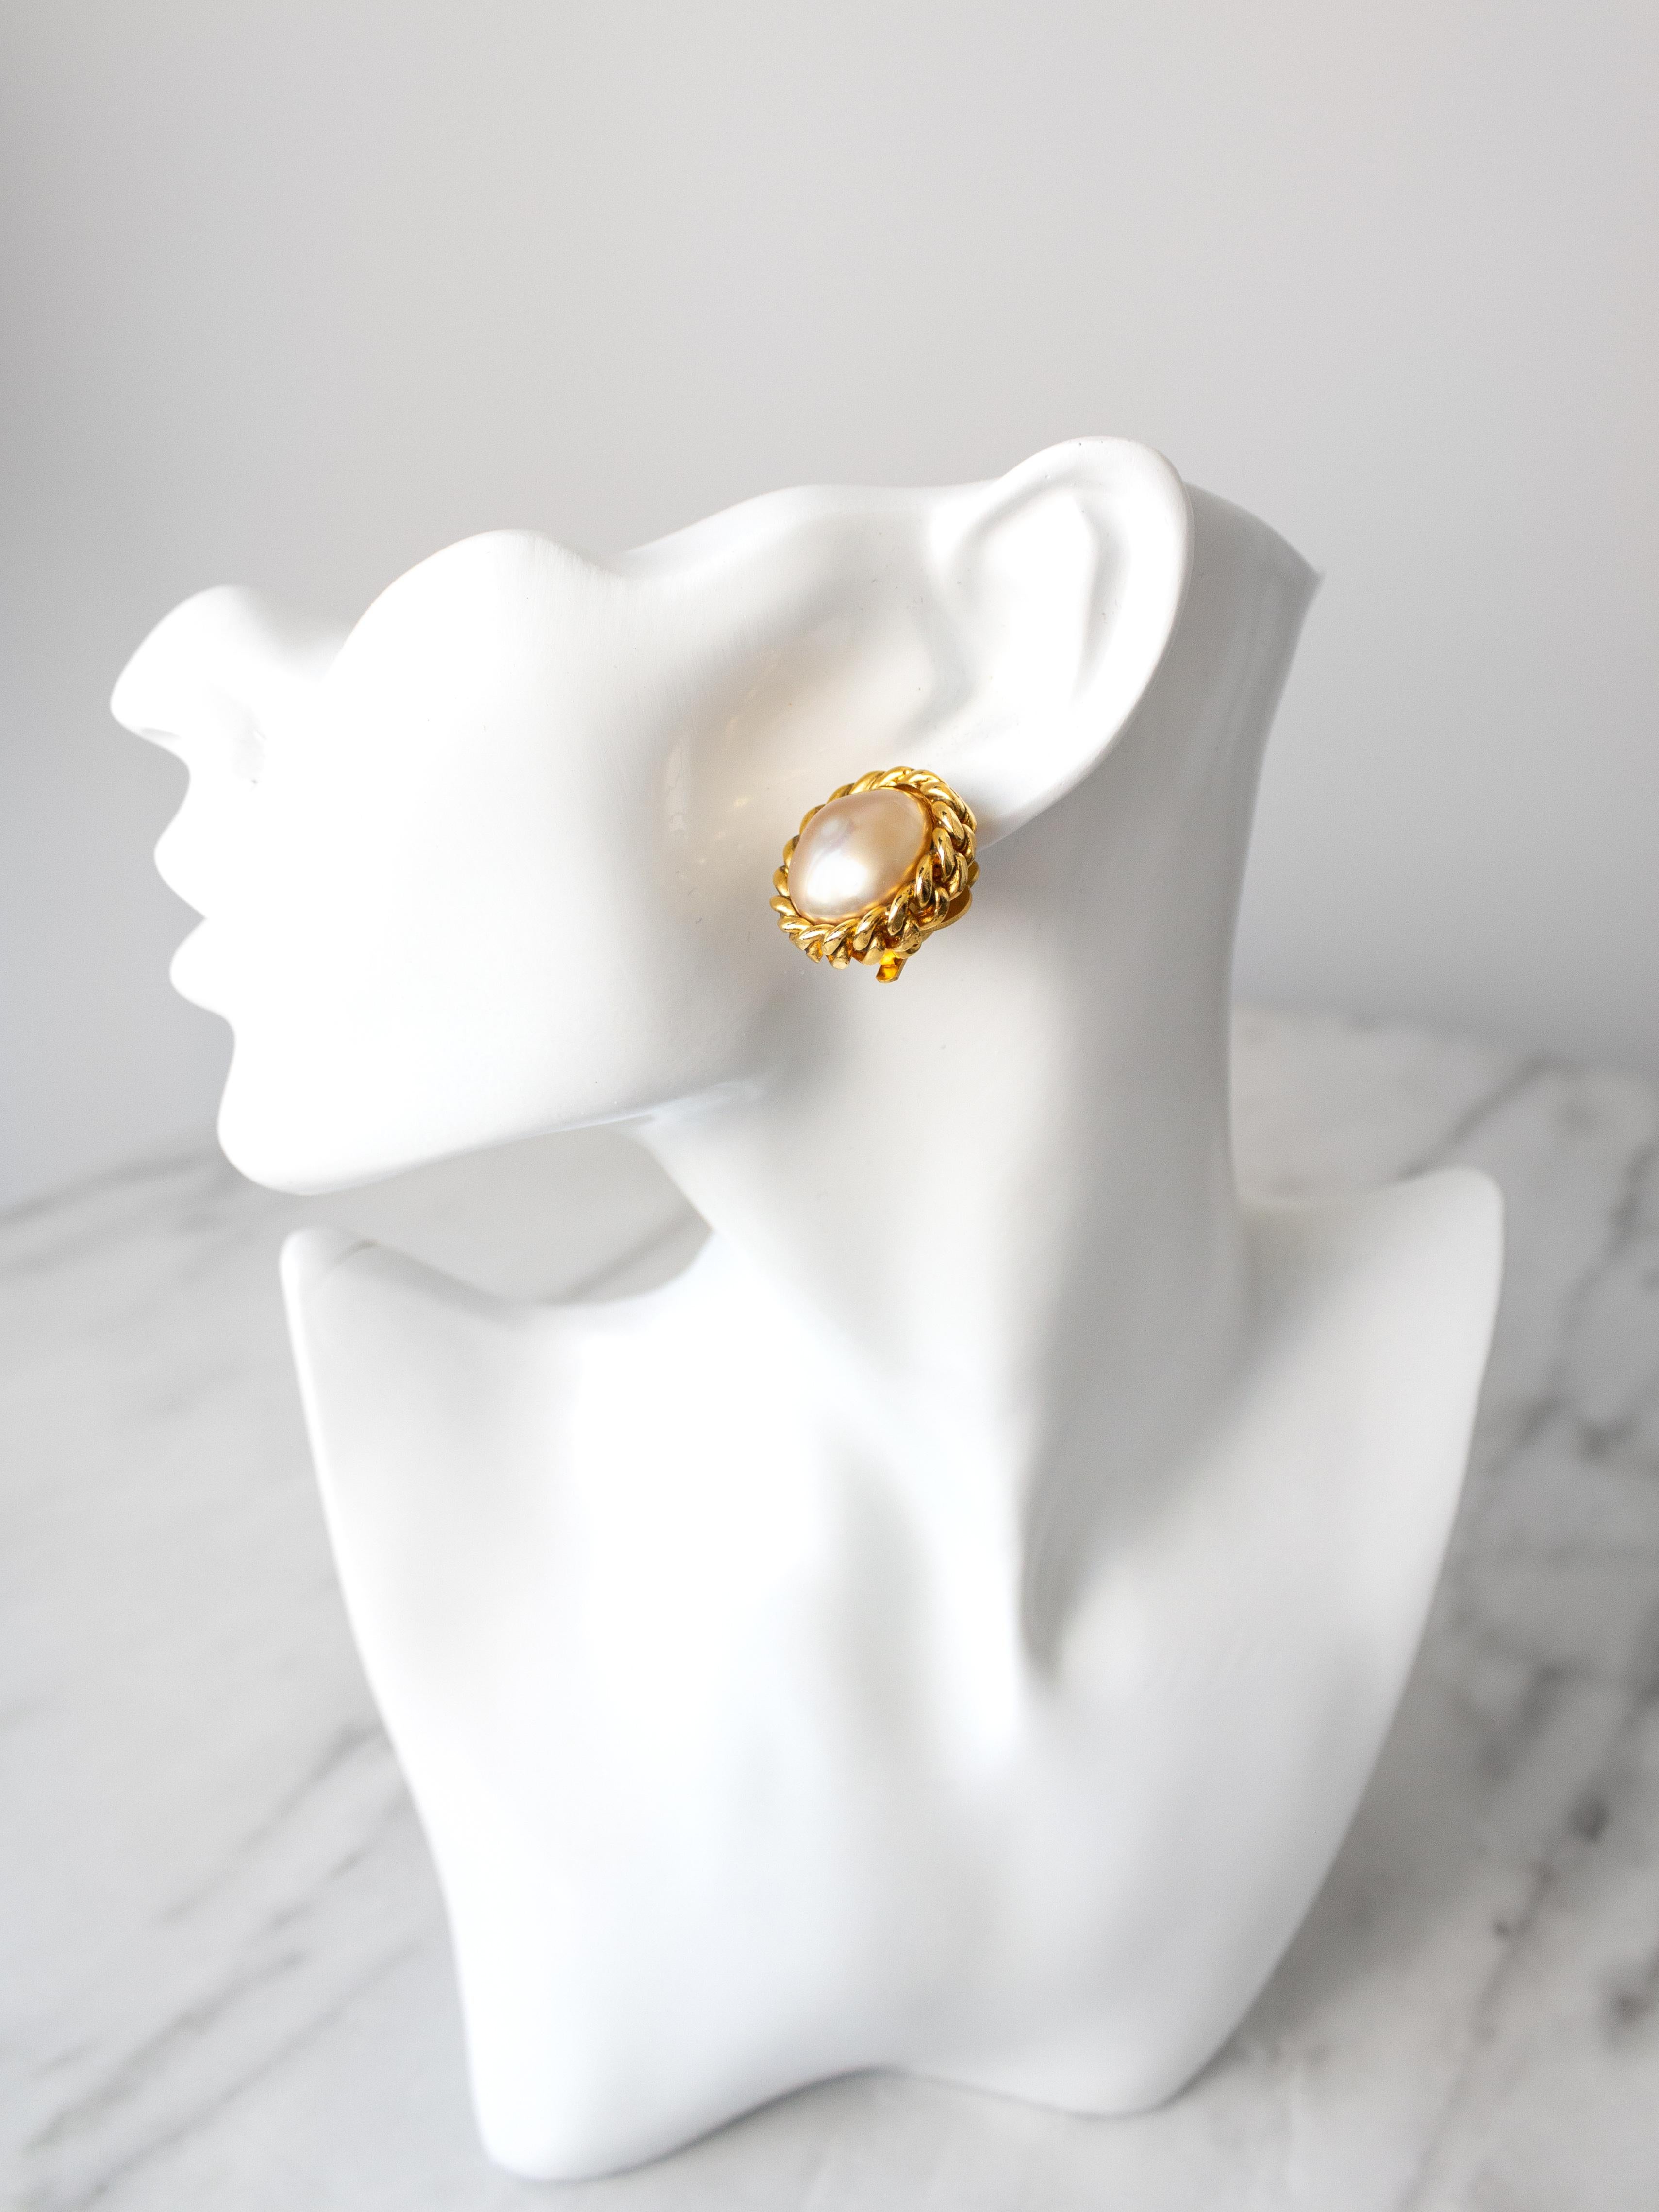 A classic pair of clip-on earrings by Chanel, circa 1980s. They feature a lustrous creamy white faux pearl at their center, delicately encased in gold-plated metal. Chanel's costume jewelry from the 1980s and 1990s remains highly sought after due to